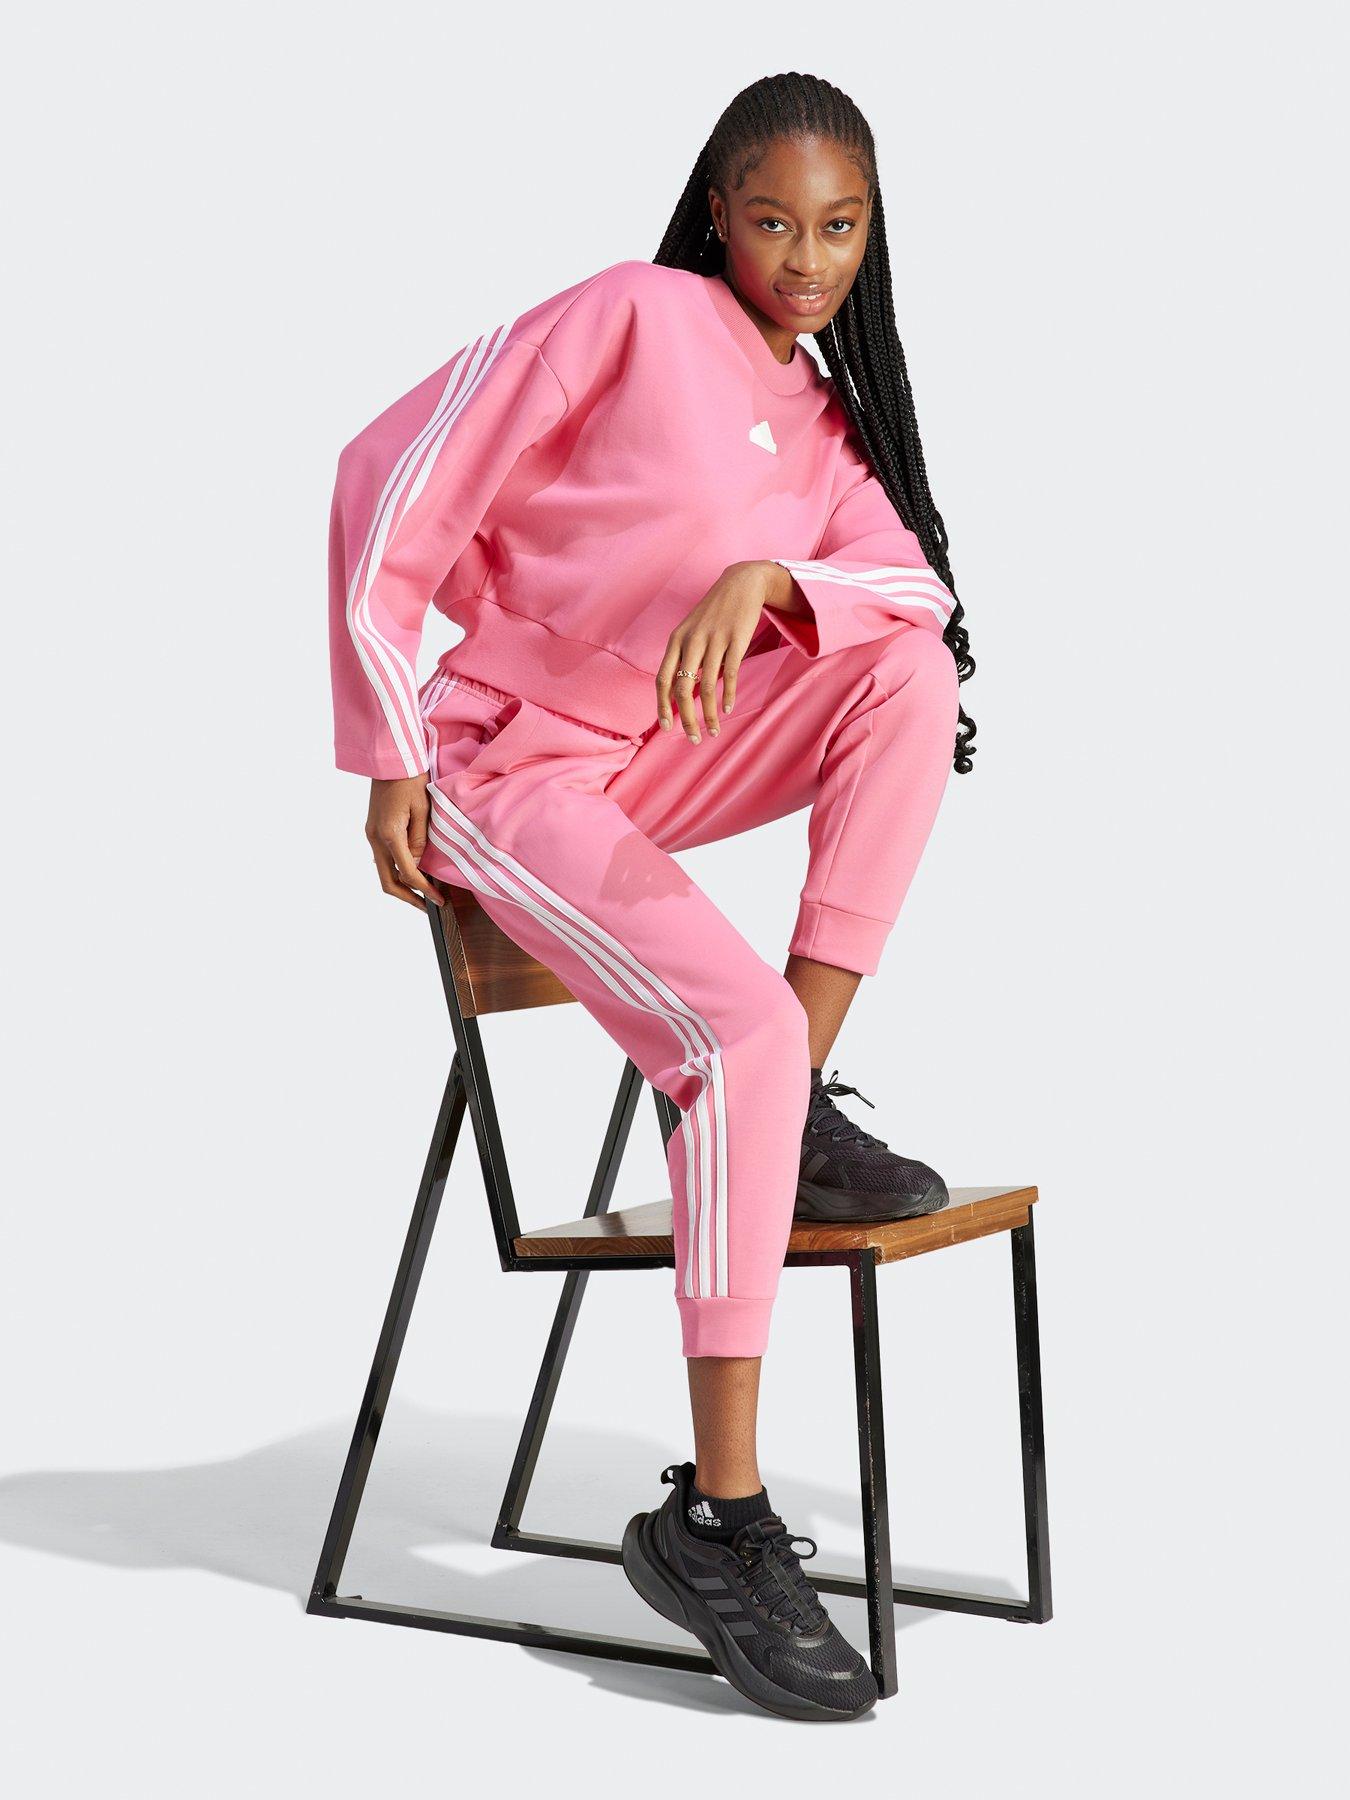 adidas Future Icons 3-Stripes Tracksuit Bottoms Womens